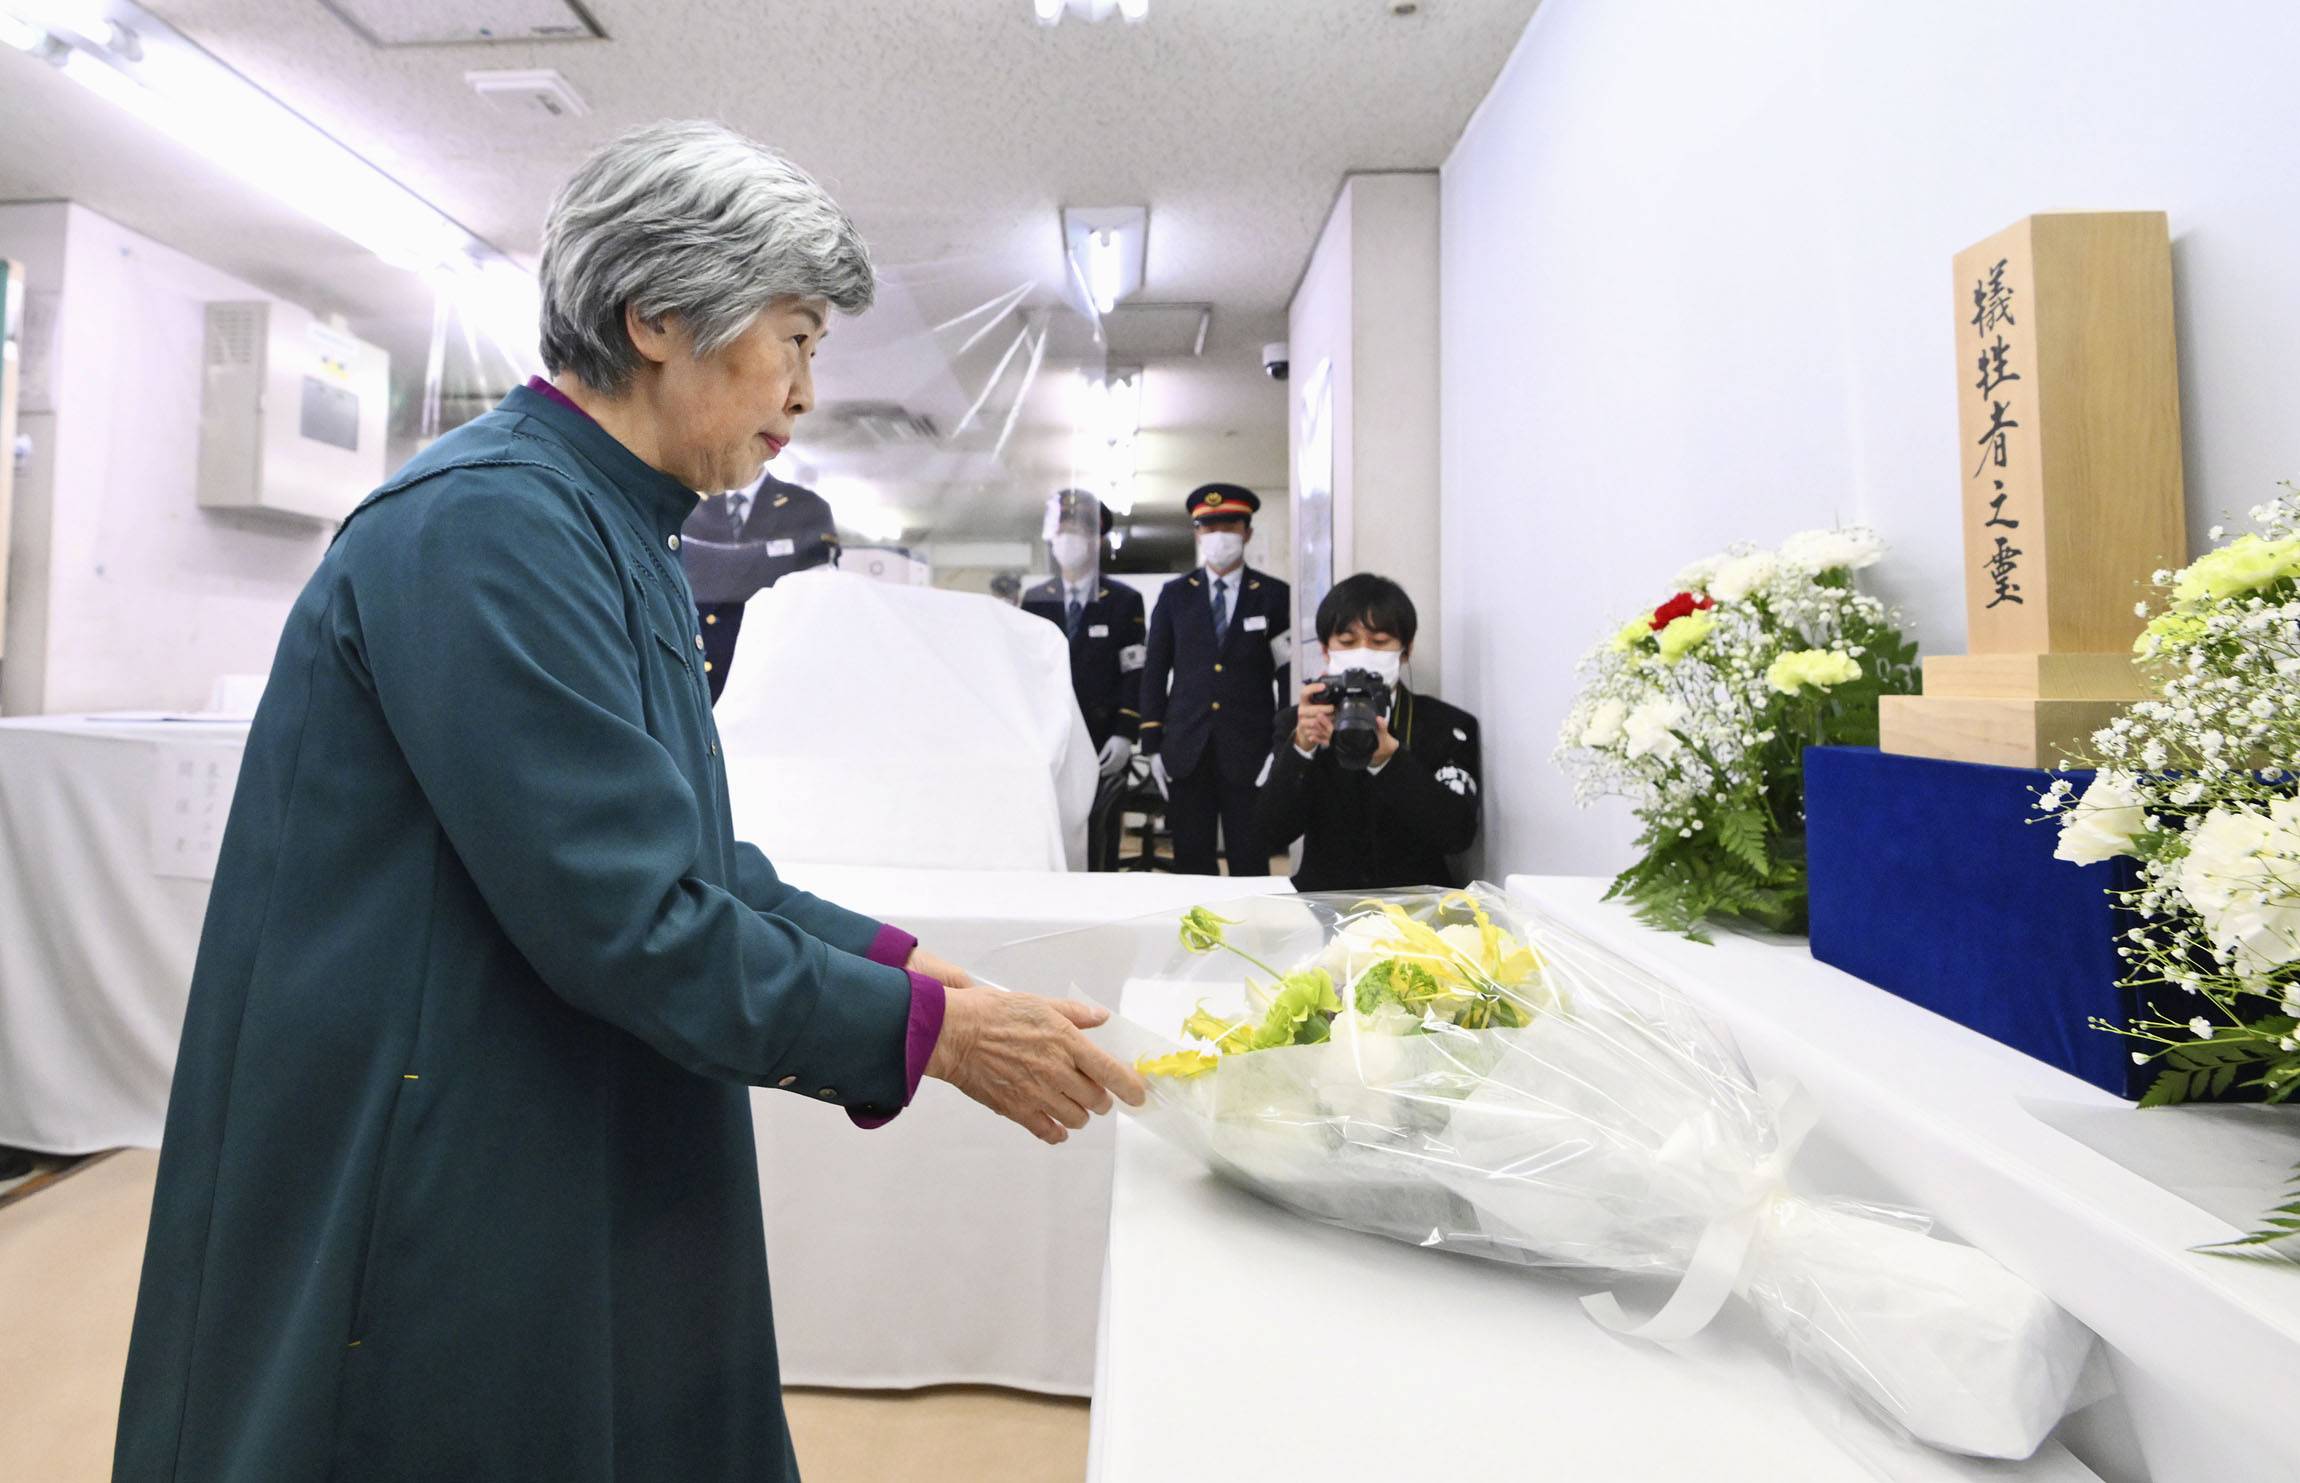 Shizue Takahashi lays flowers at Kasumigaseki Station in Tokyo on Monday, 28 years since the Aum Shinrikyo cult's nerve gas attack on the Tokyo subway system. | POOL / VIA KYODO